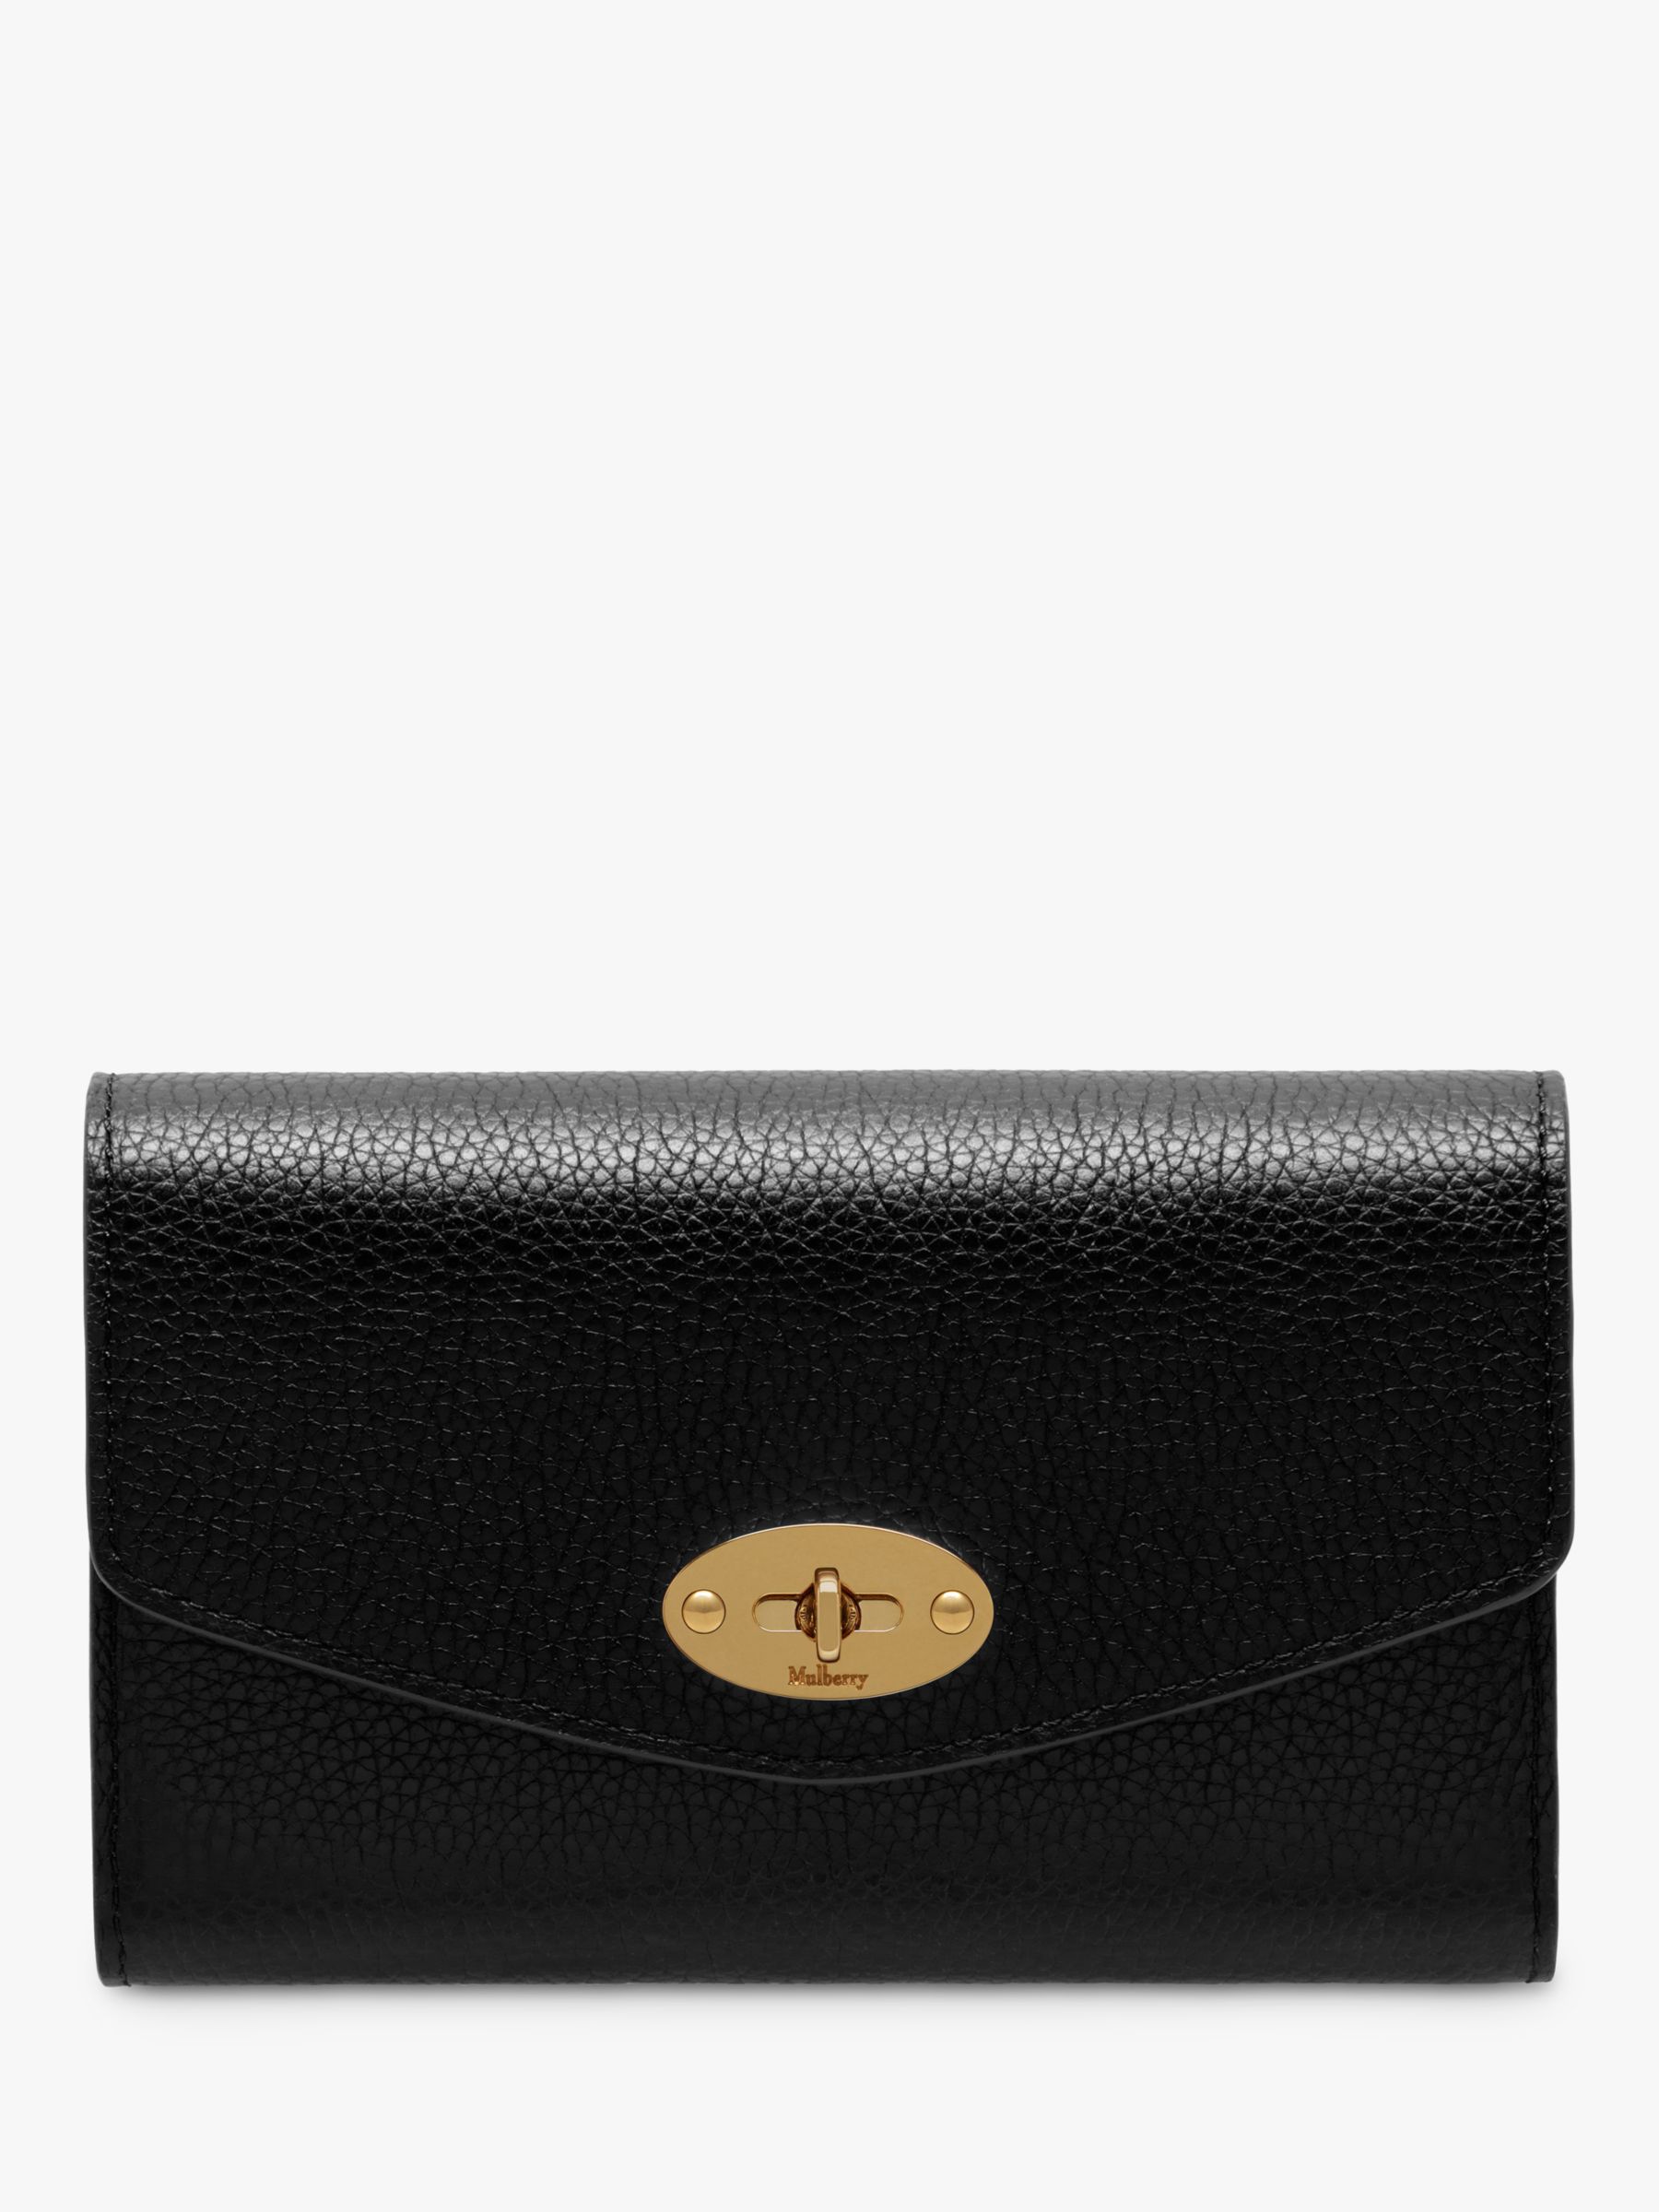 Buy Mulberry Darley Classic Grain Leather Medium Wallet Online at johnlewis.com